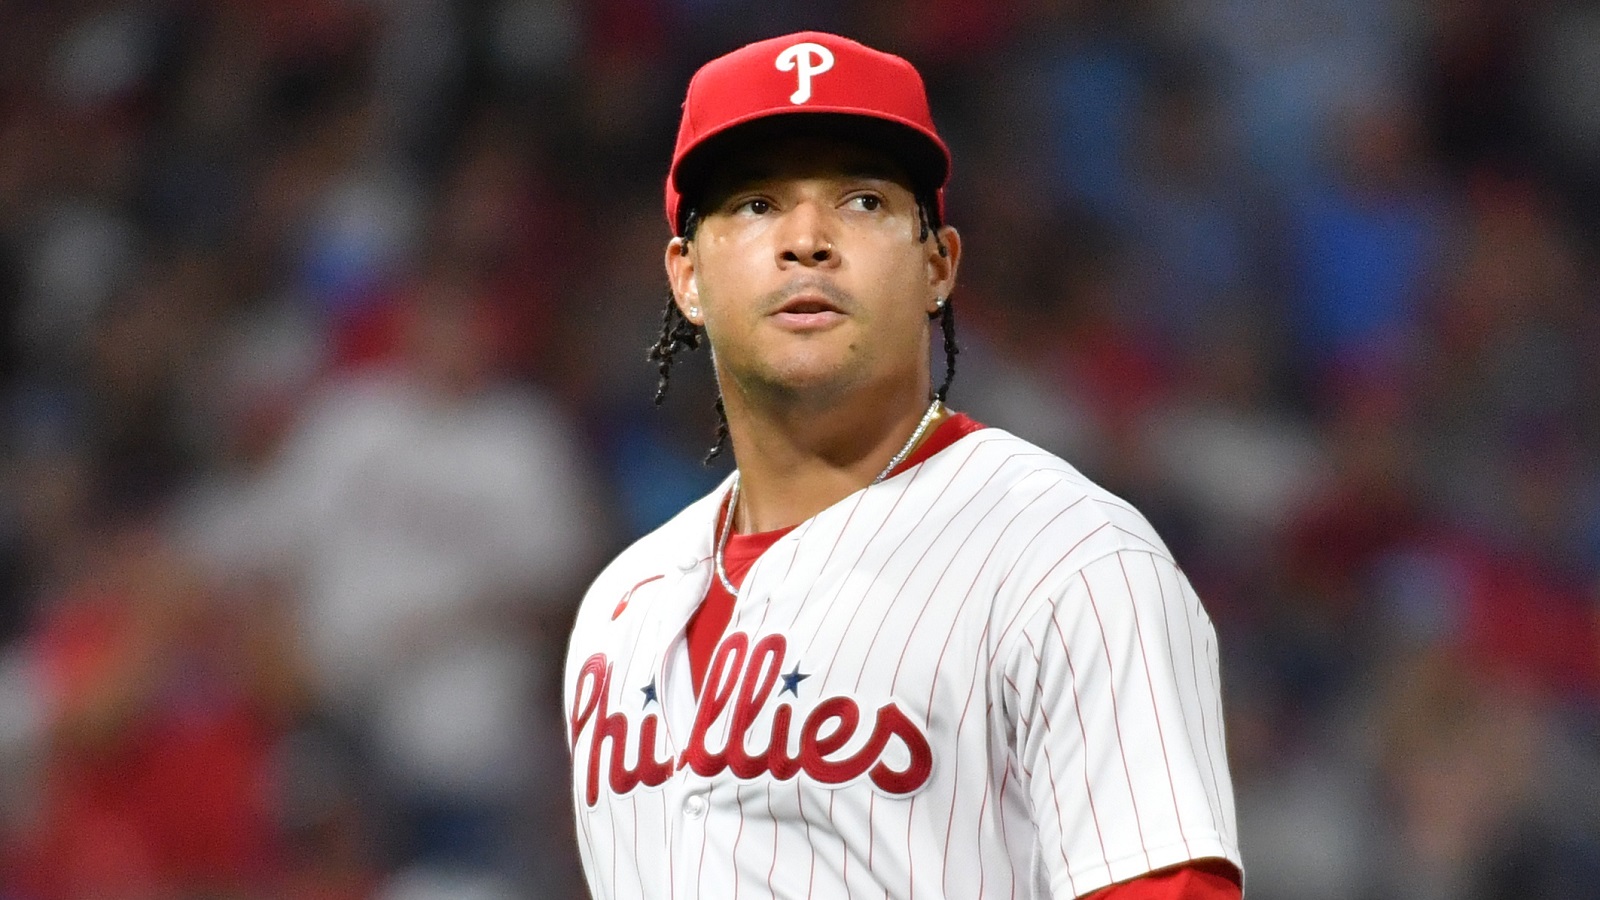 Report reveals why Taijuan Walker did not start Game 4 for Phillies